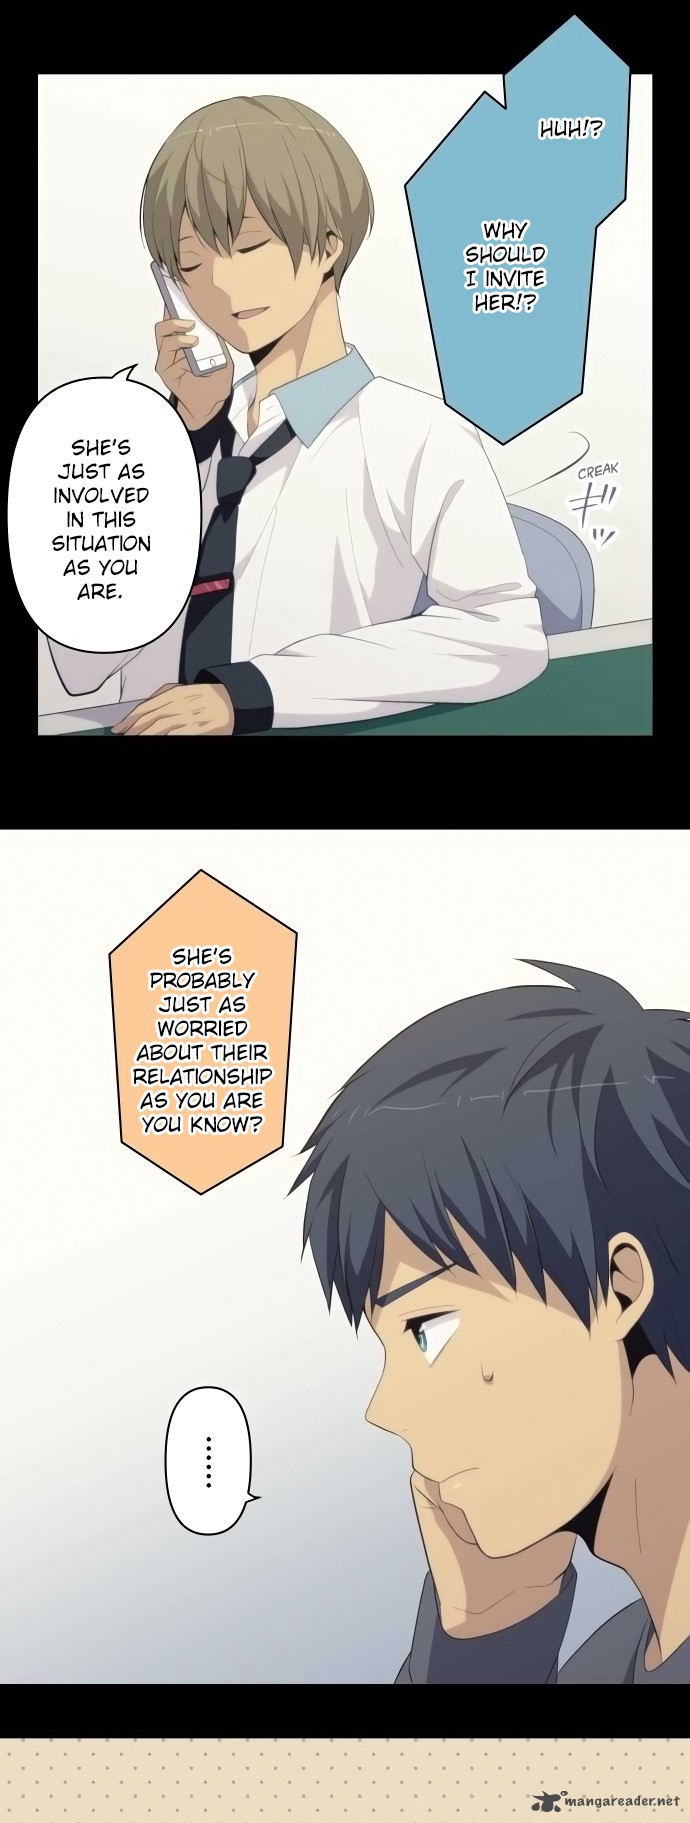 Relife 173 8